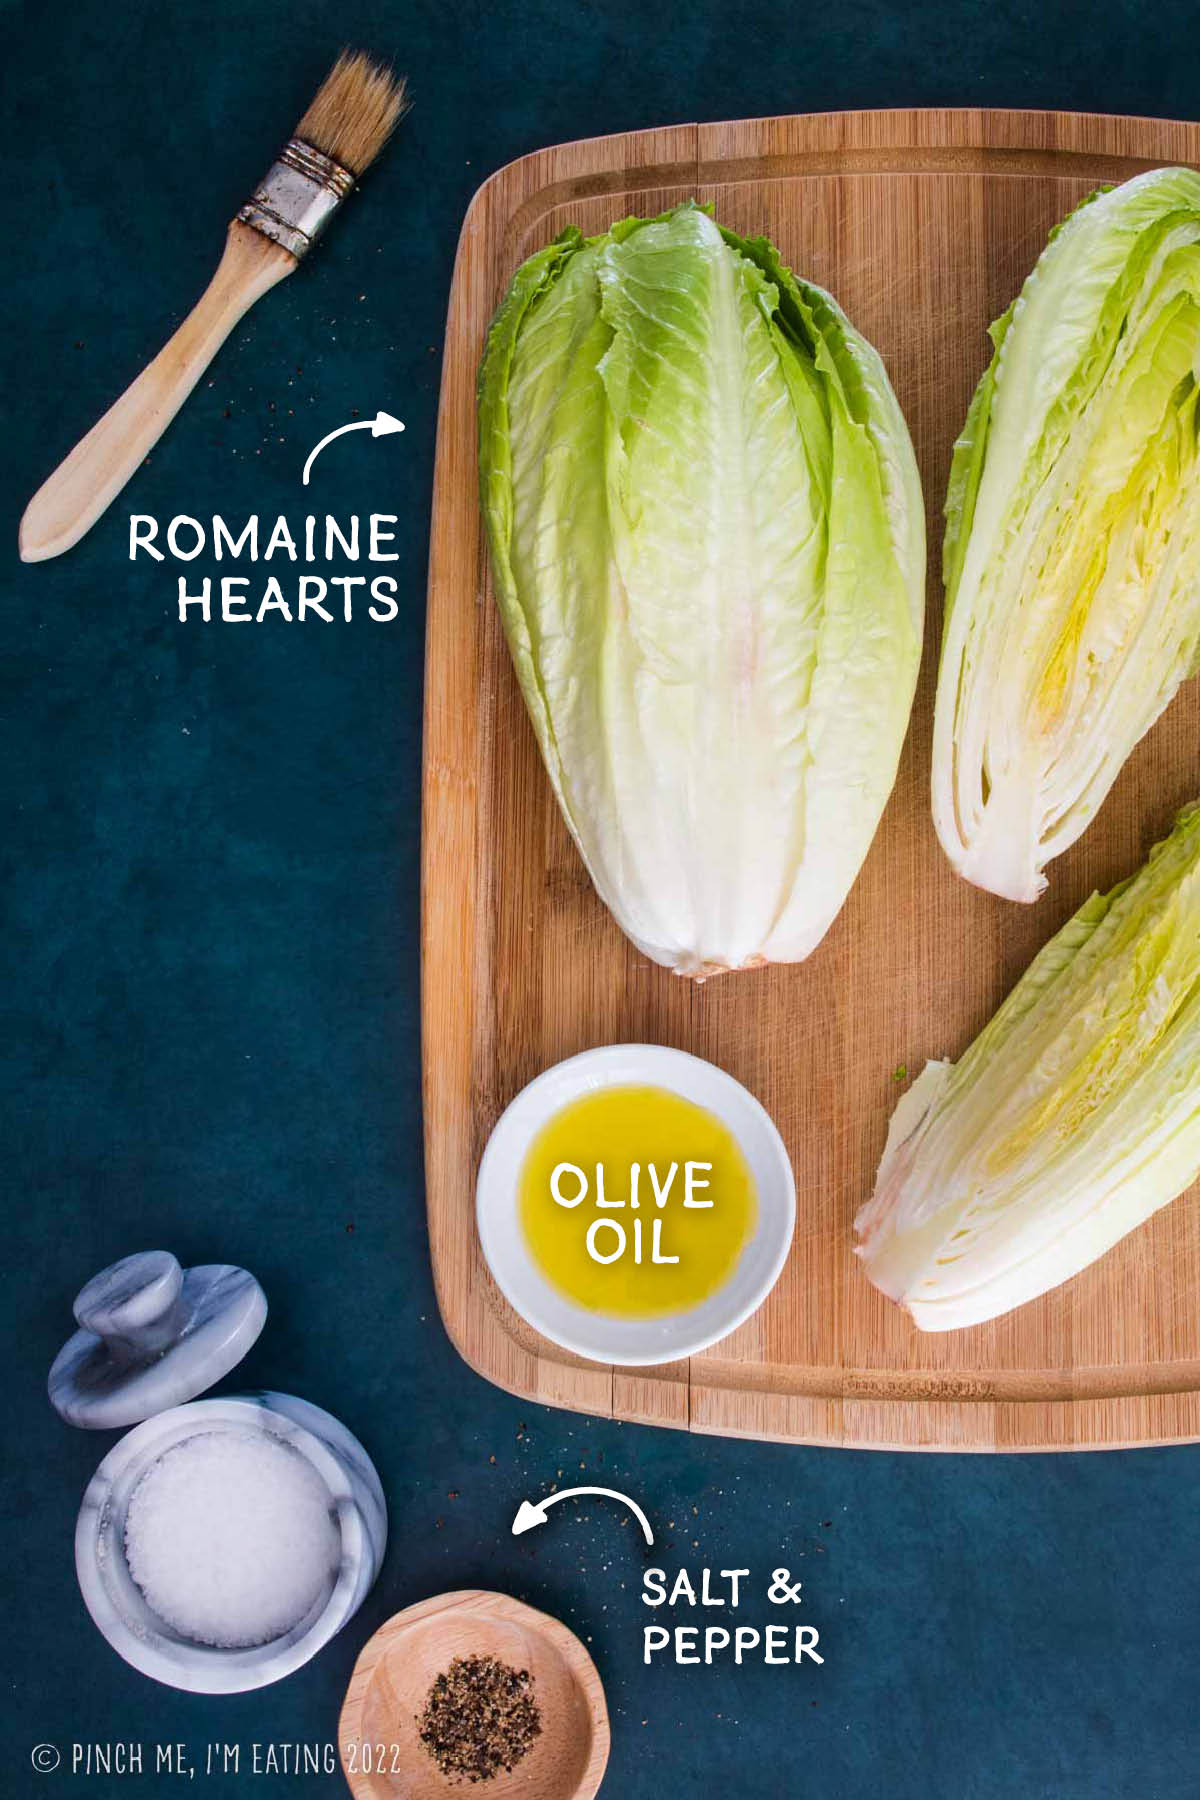 Ingredients for grilled romaine hearts.